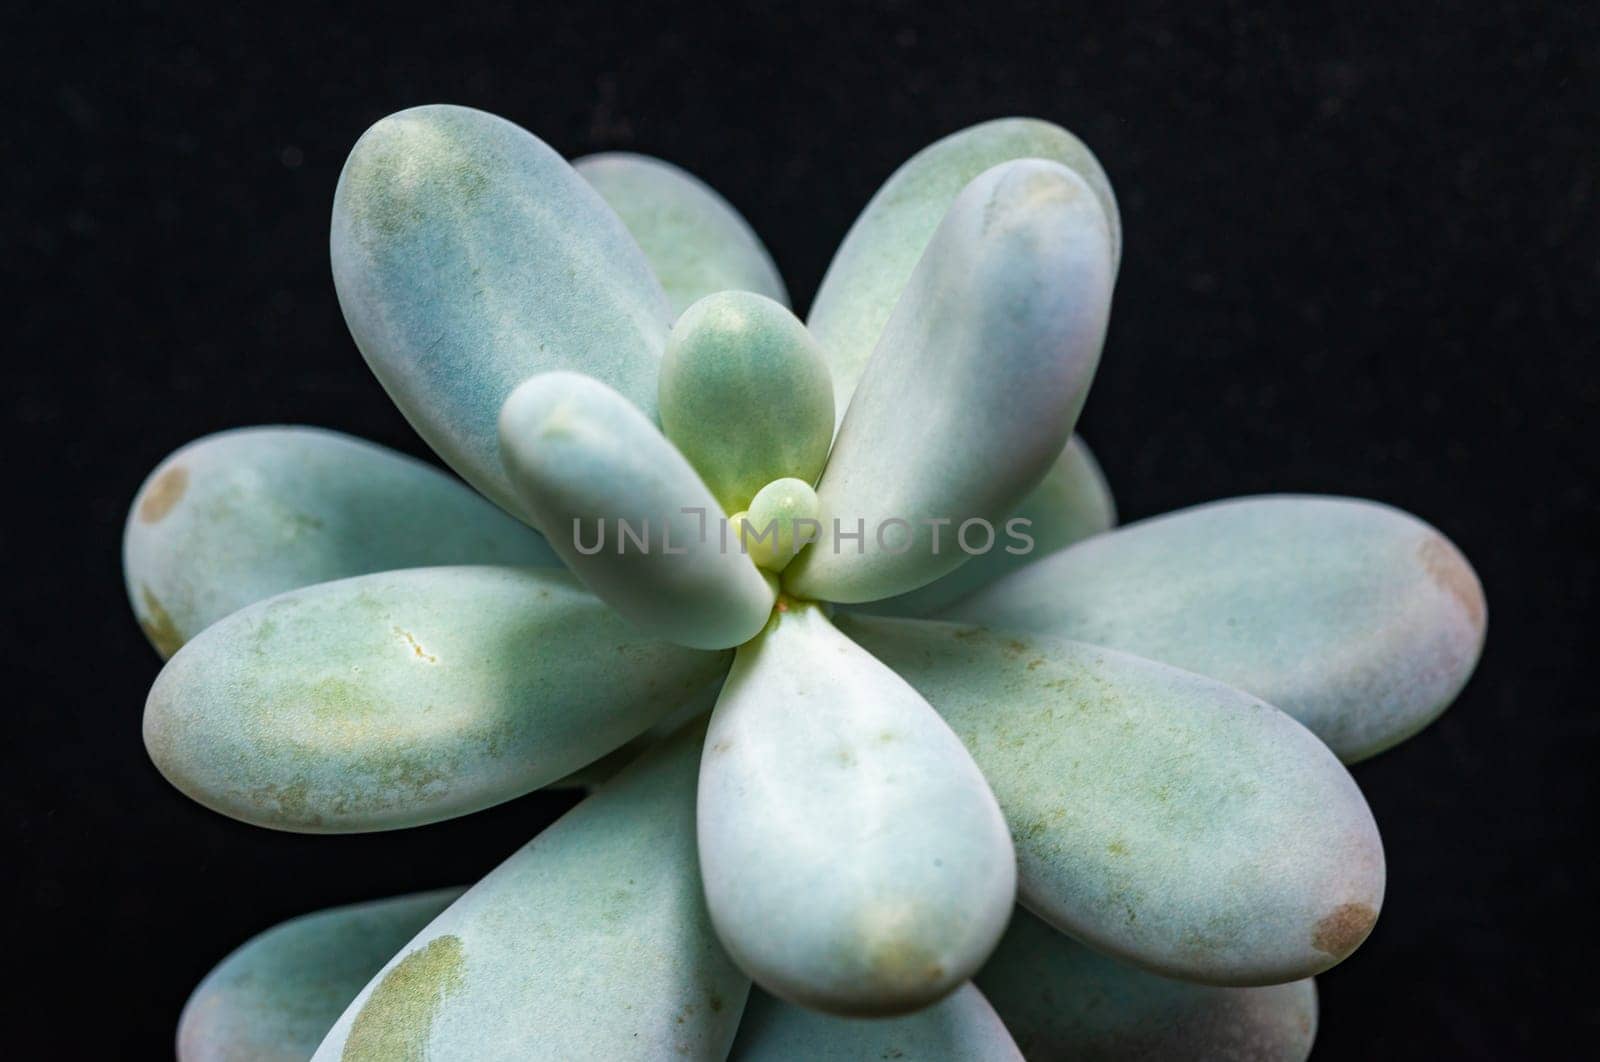 (Pachyphytum sp., 	Crassulaceae), fleshy succulent plant with thick rounded leaves from the collection, Ukraine